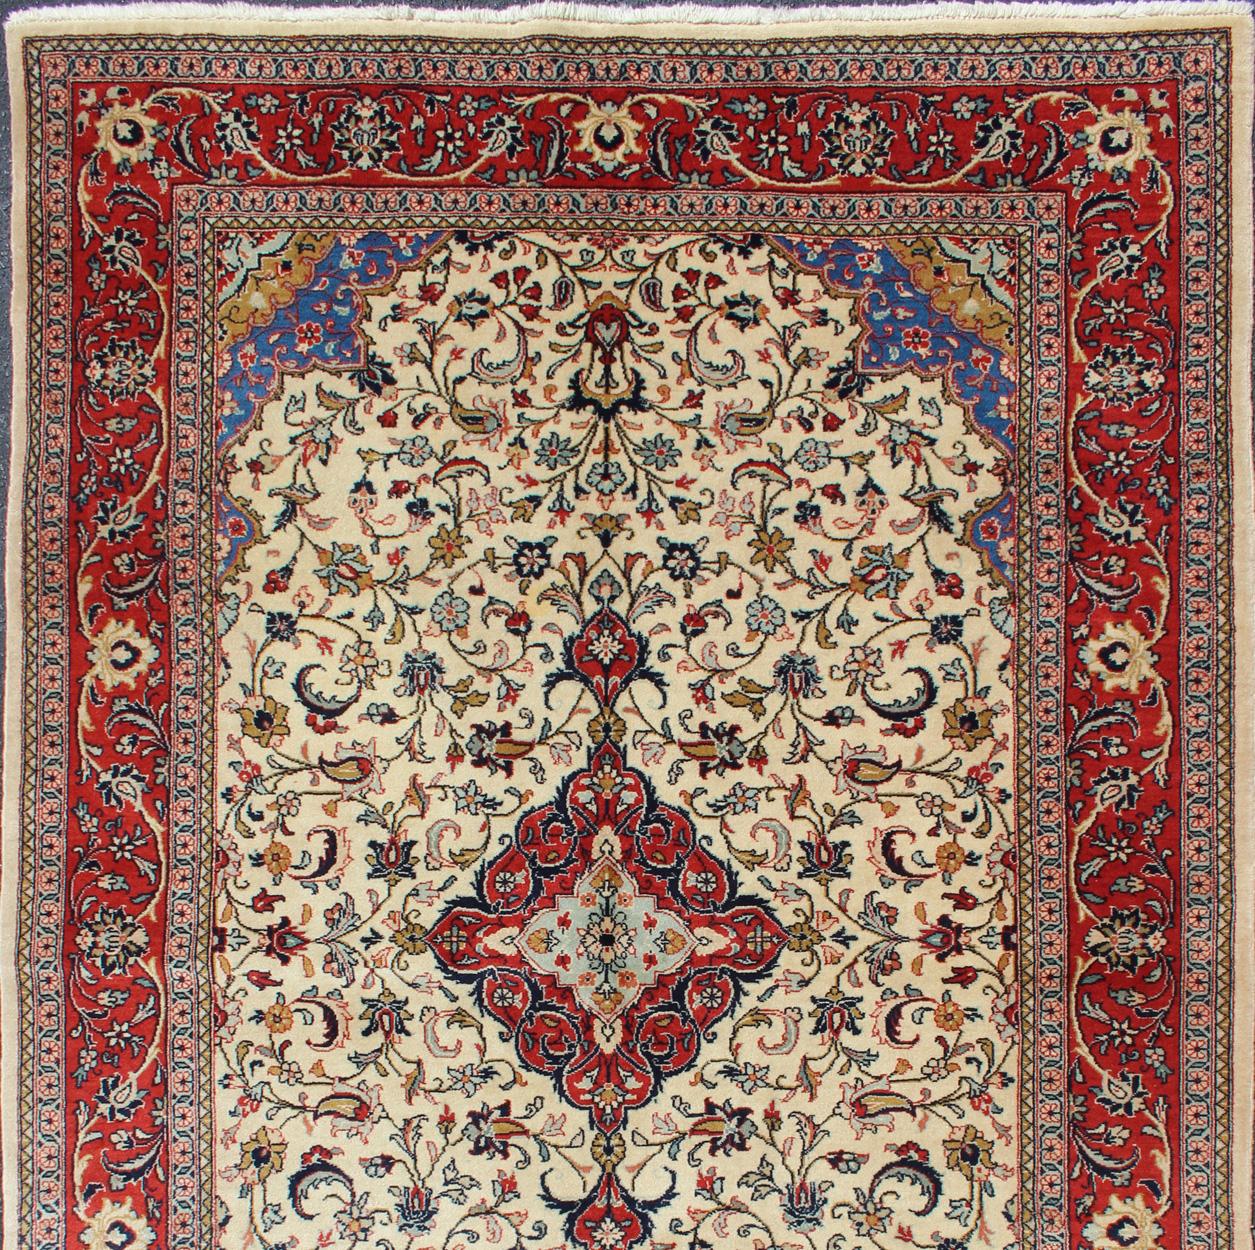 Vintage Persian Tabriz Rug with Floral Design in Cream, blue and Red 5